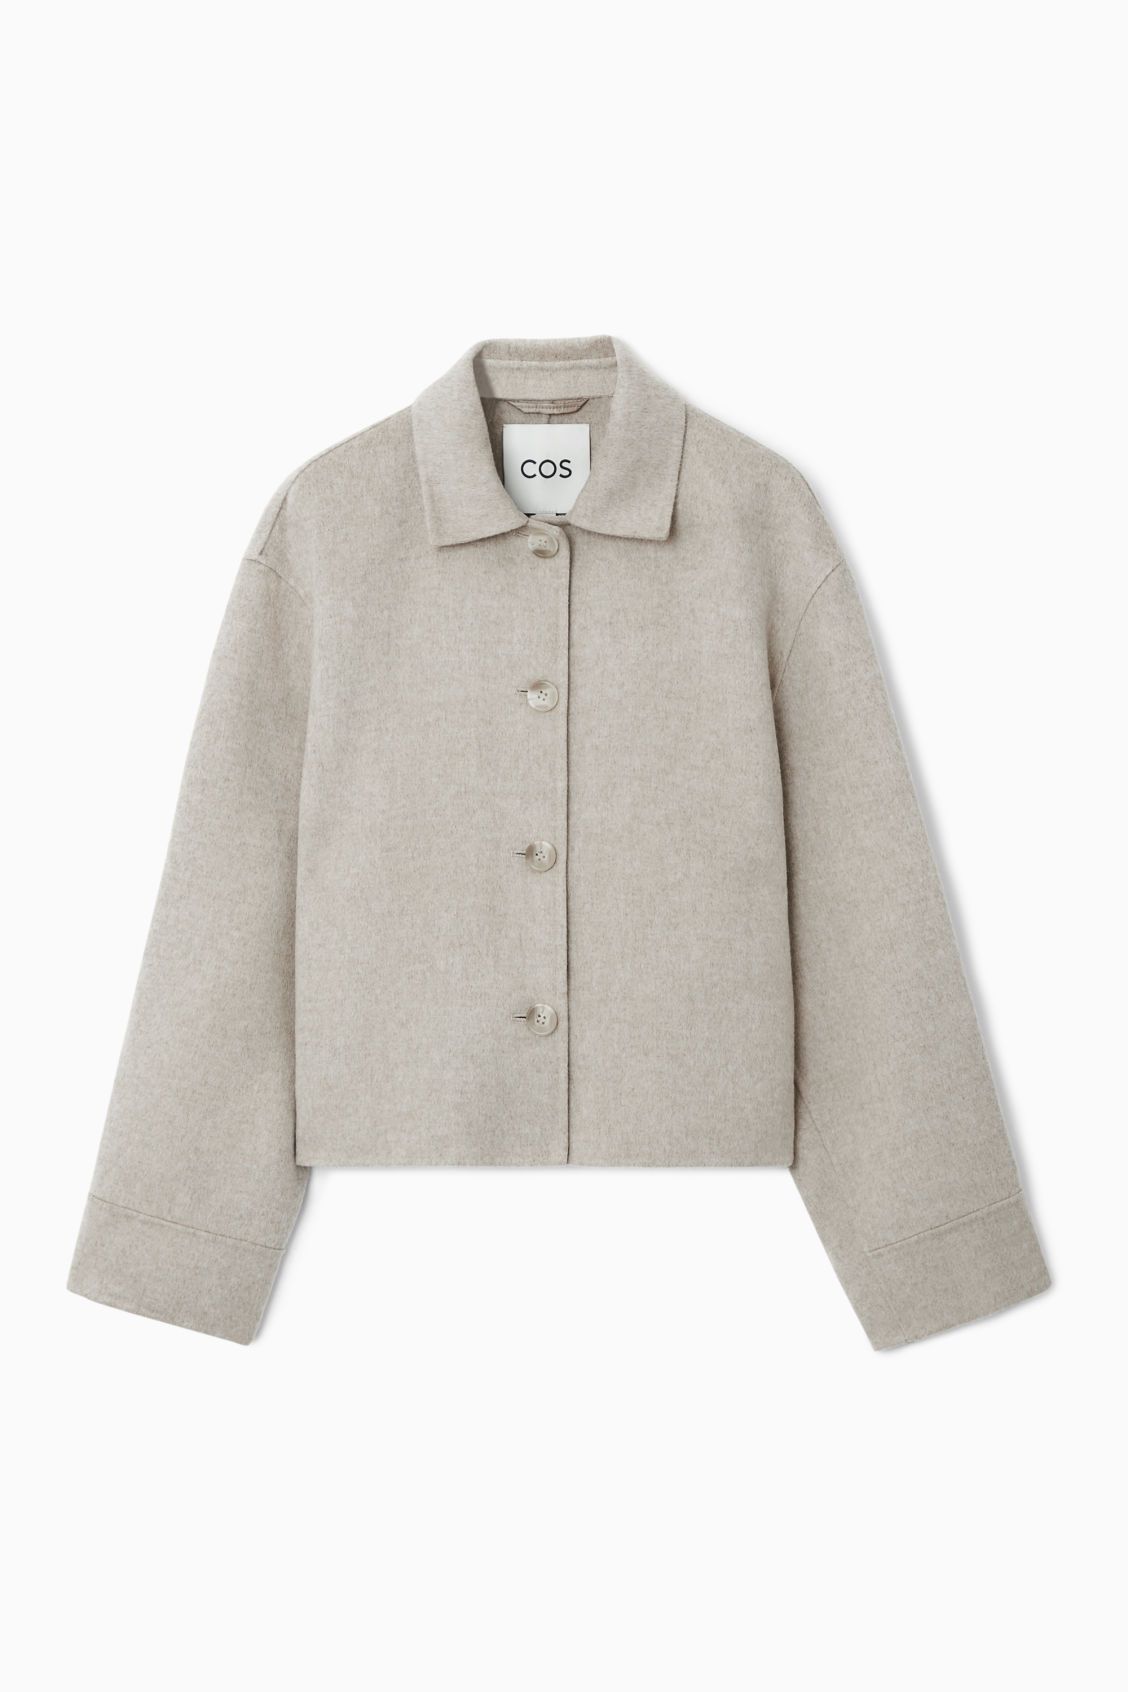 BOXY DOUBLE-FACED WOOL JACKET - CREAM - COS | COS UK